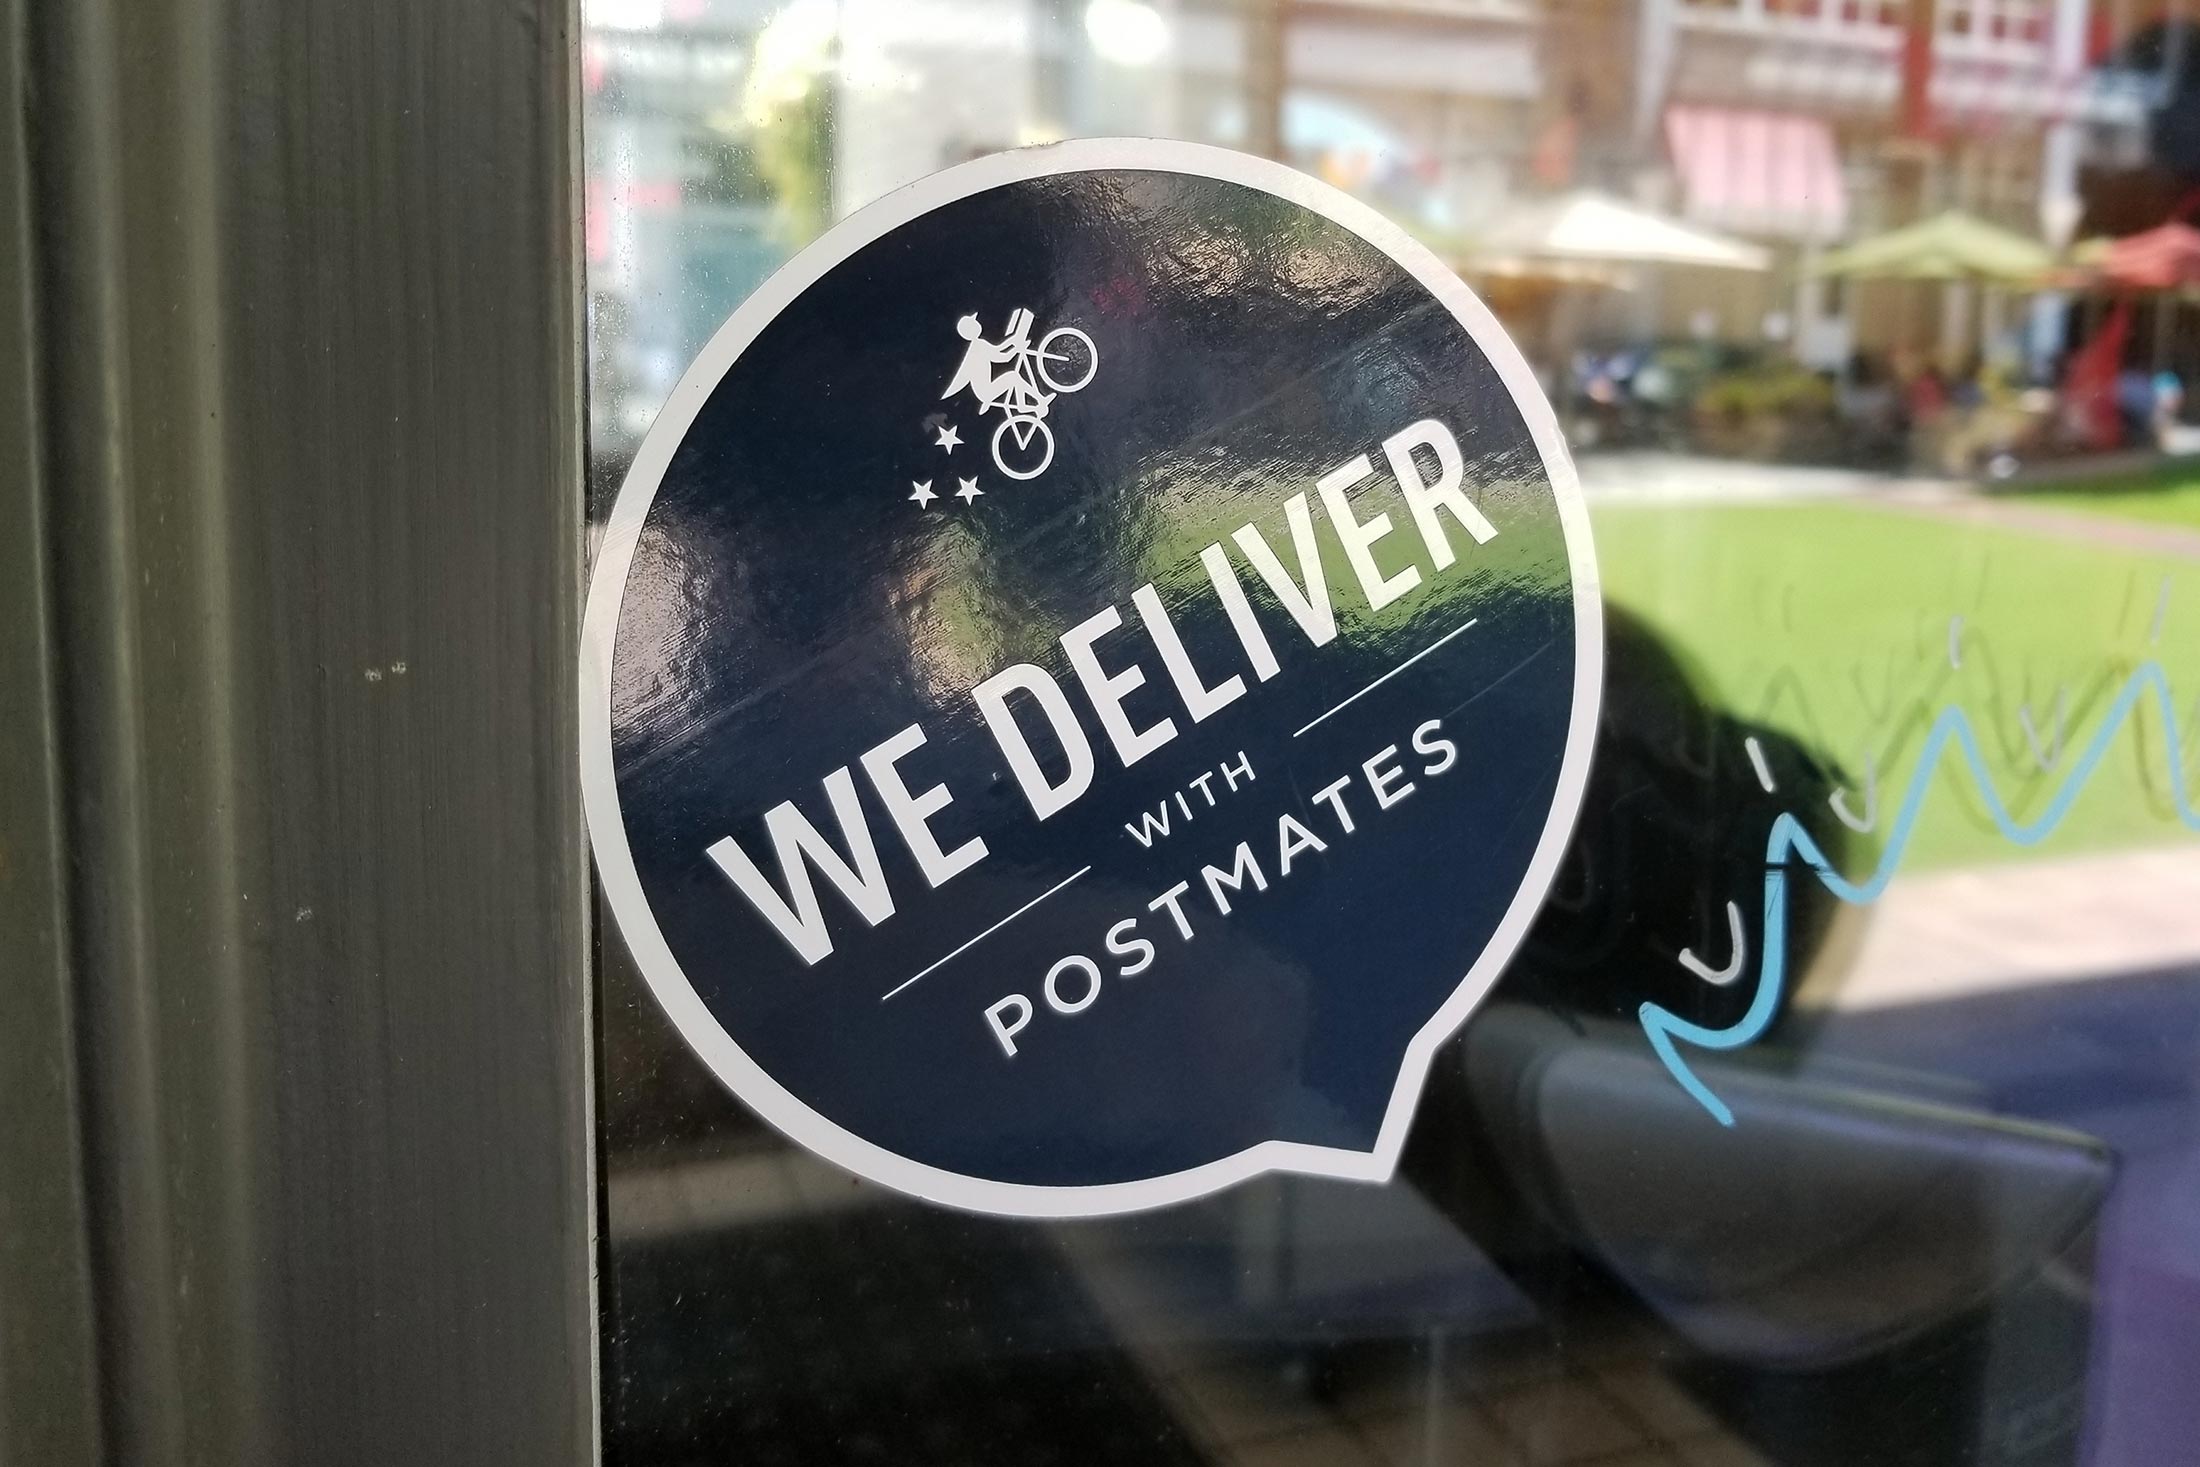 Postmates would be more than just scraps for Uber Eats.